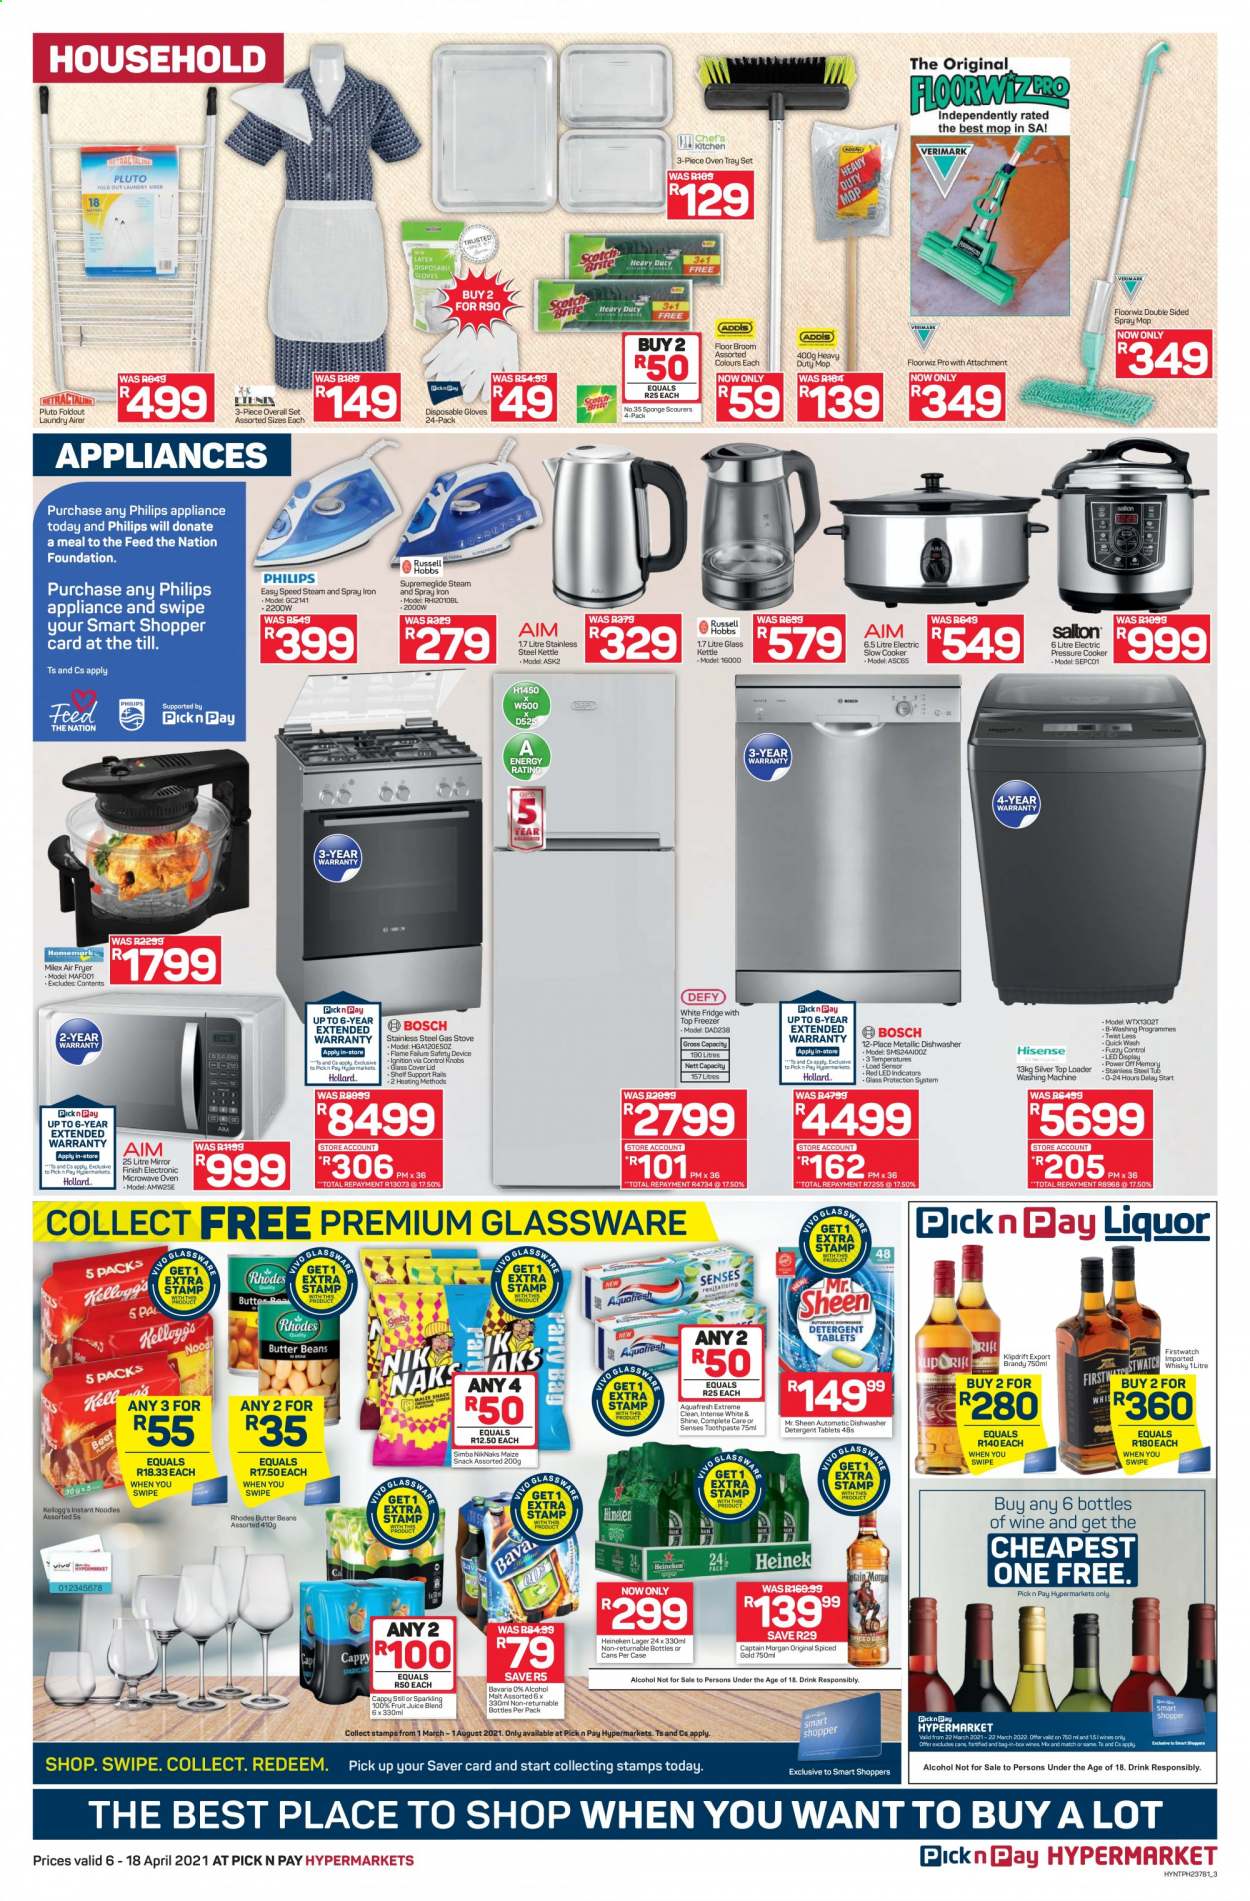 Pick n Pay specials - 04.06.2021 - 04.18.2021. 